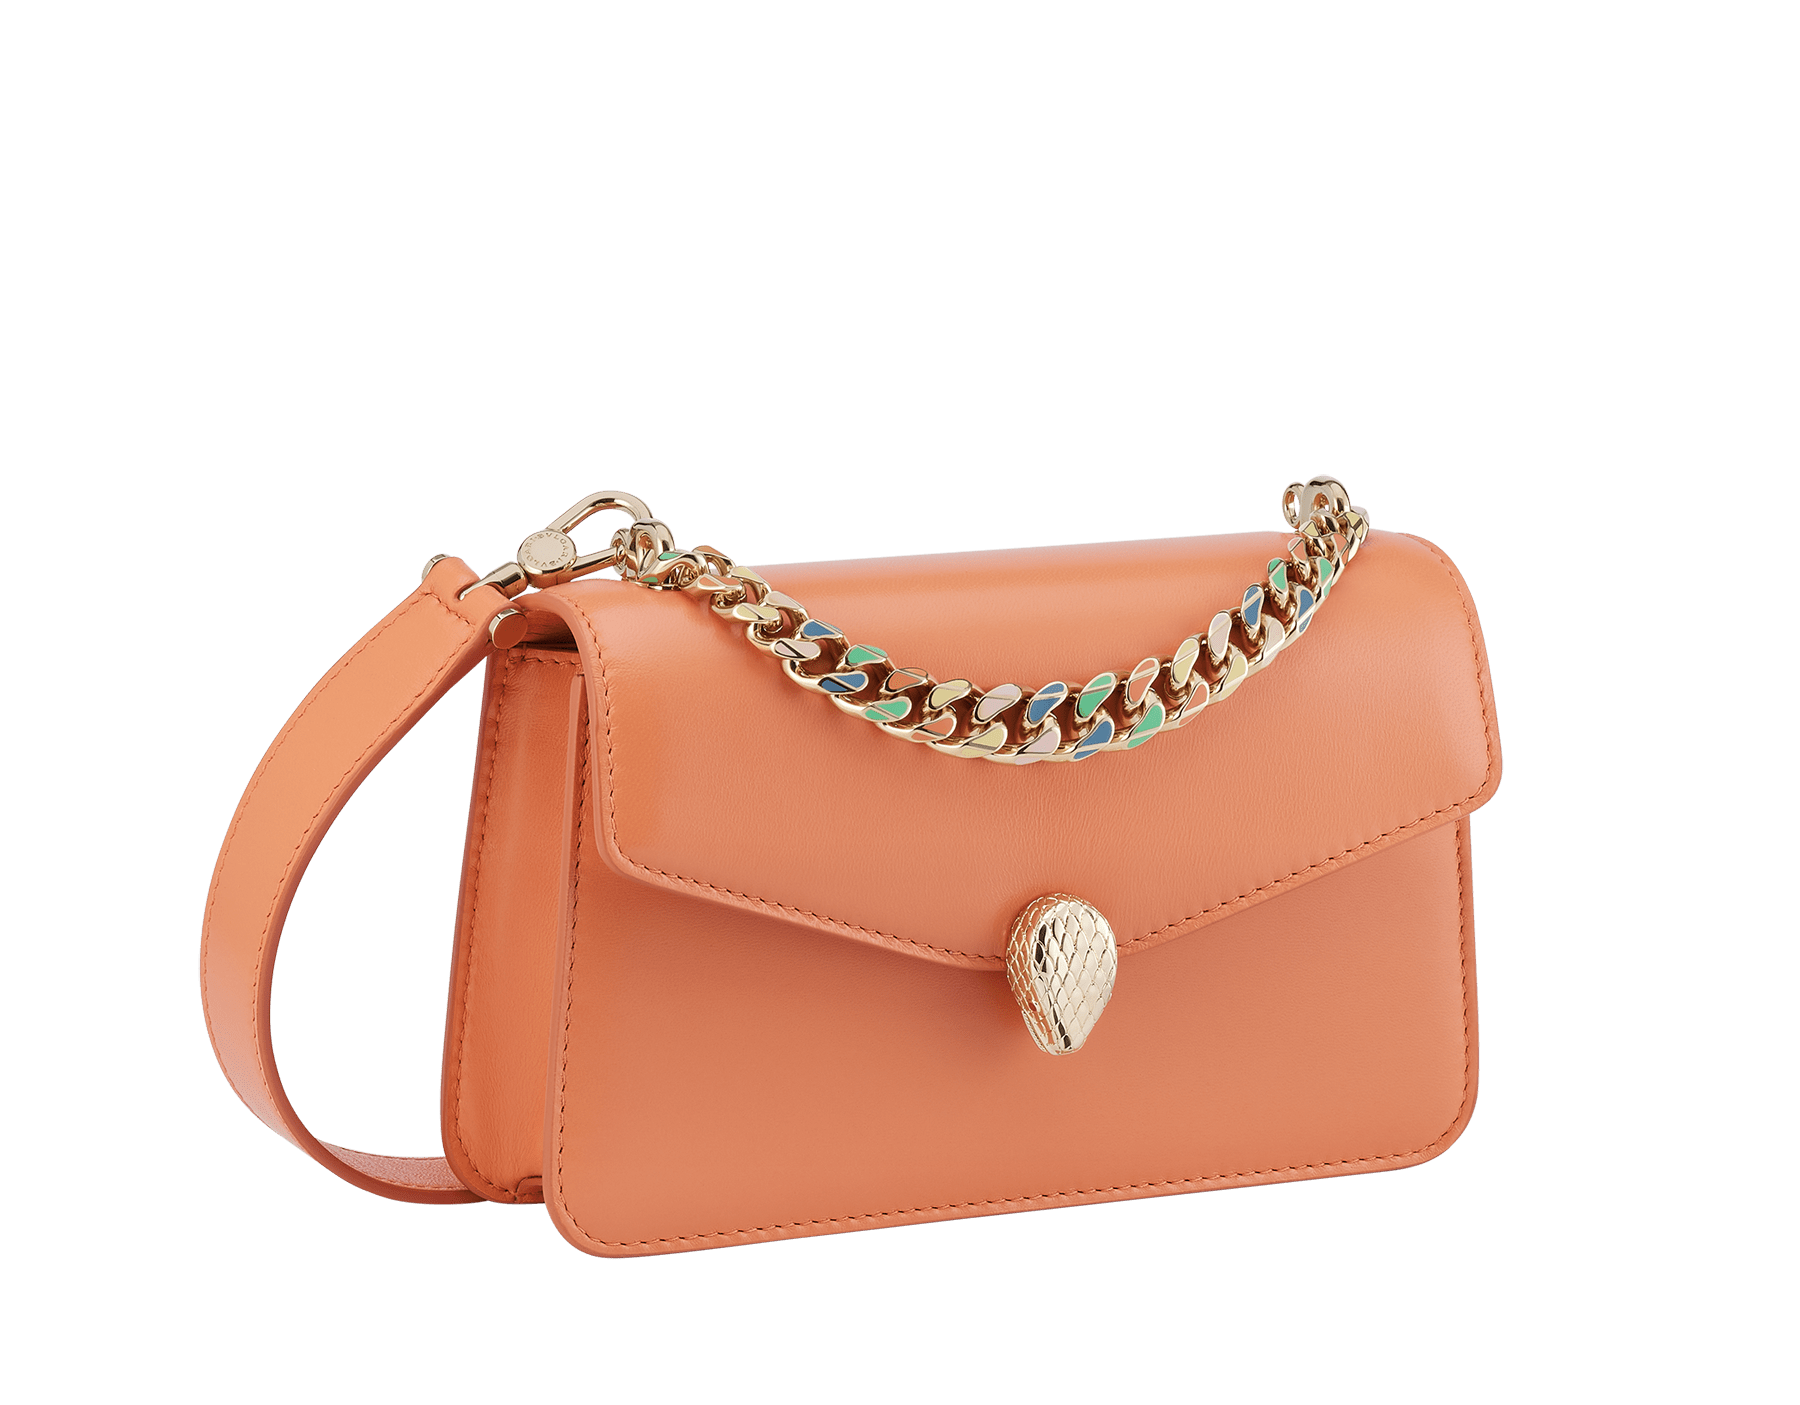 "Serpenti Forever" maxi chain pochette in Blush Quartz pink calf leather and Deep Garnet burgundy nappa leather. New Serpenti head closure in gold-plated brass, finished with red enamel eyes. SEA-XLCHAINPOUCH image 1